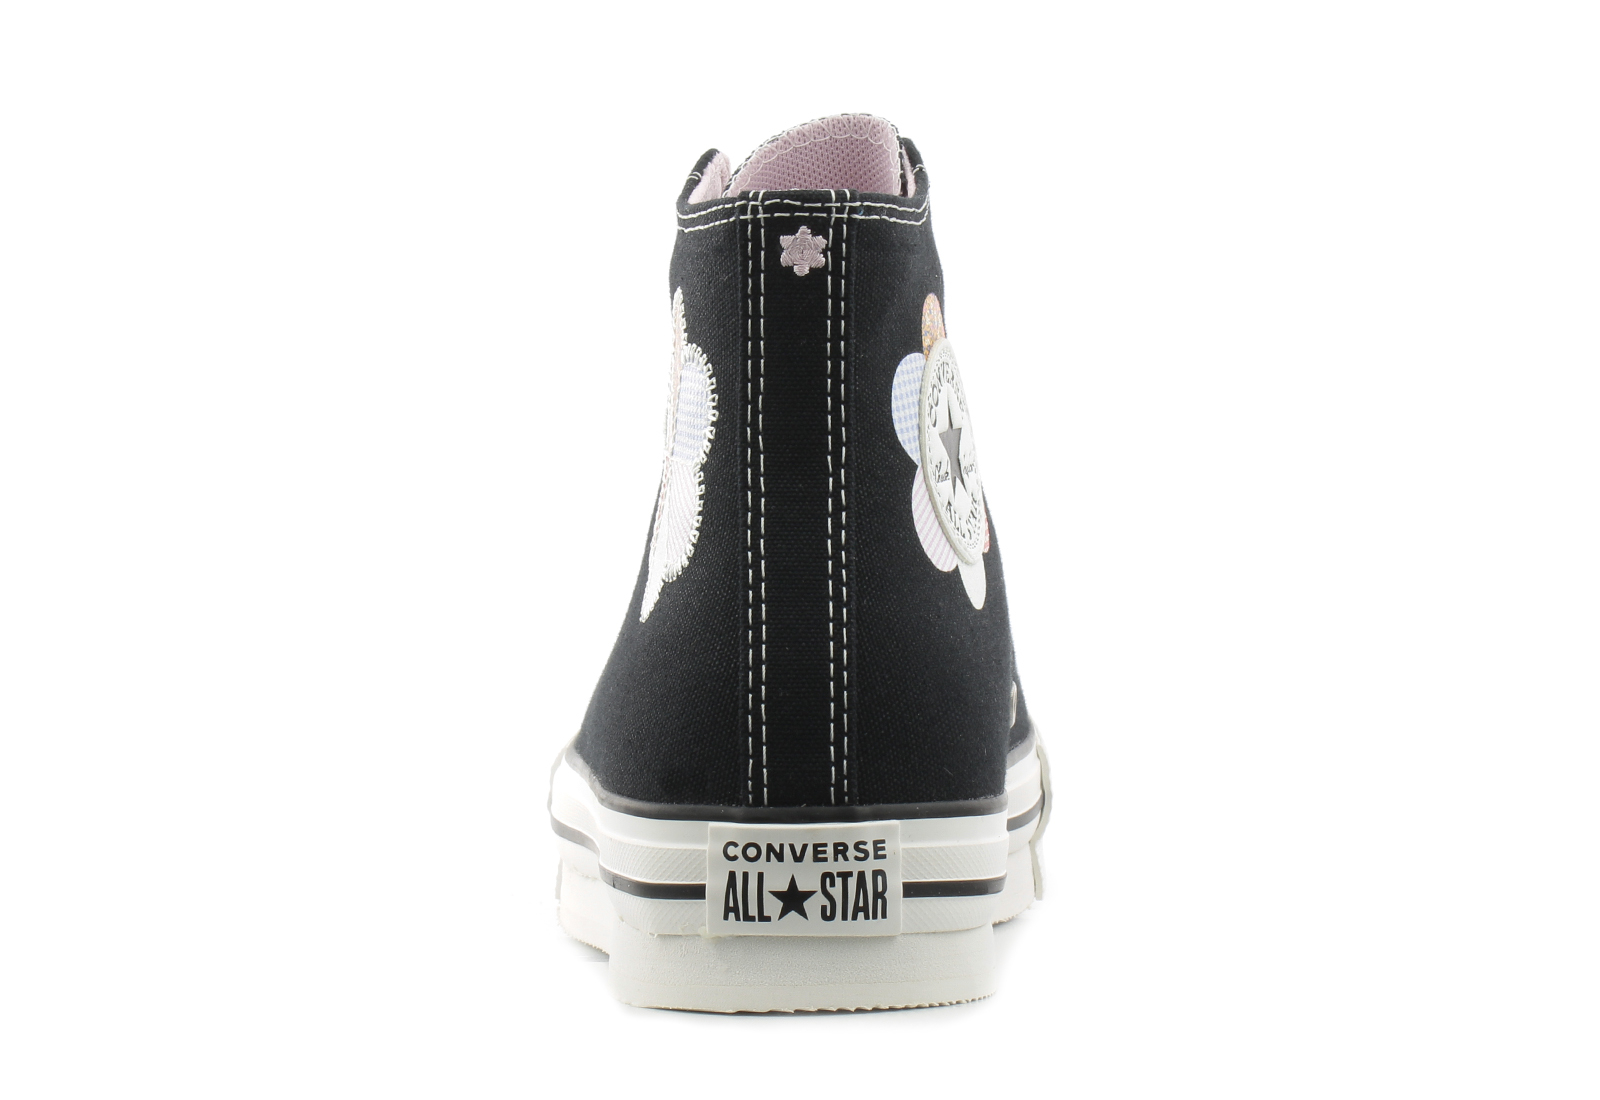 Converse High trainers - Taylor All Star Eva Lift - A05165C - Online shop for sneakers, shoes and